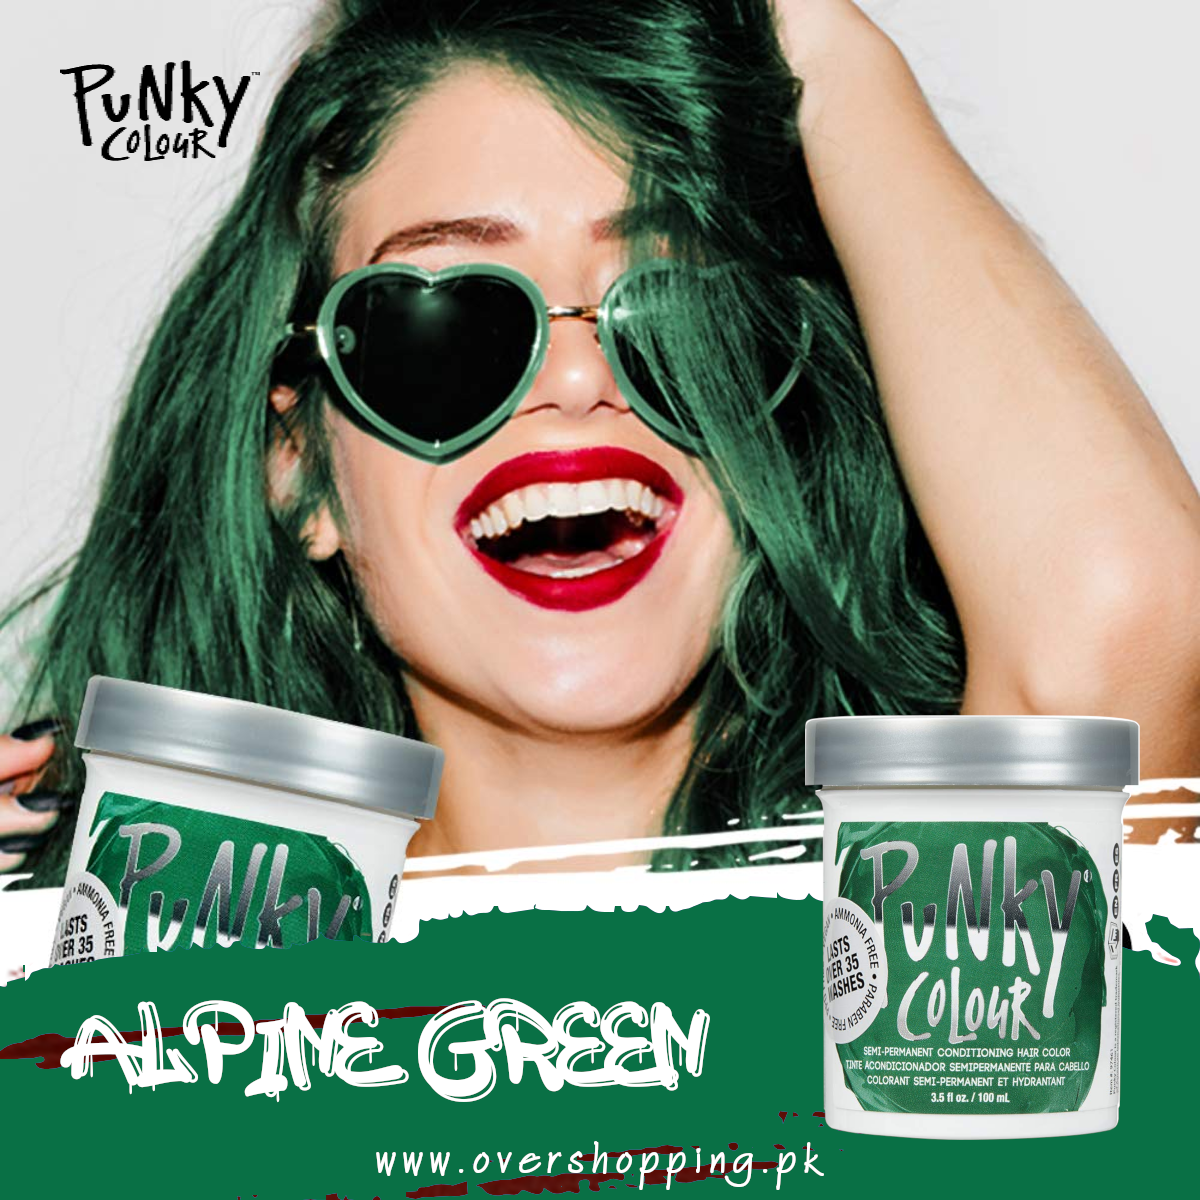 Punky Alpine Green Semi Permanent Conditioning Hair Color lasts up to 35 washes, - 3.5 Fl.Oz (100ml)